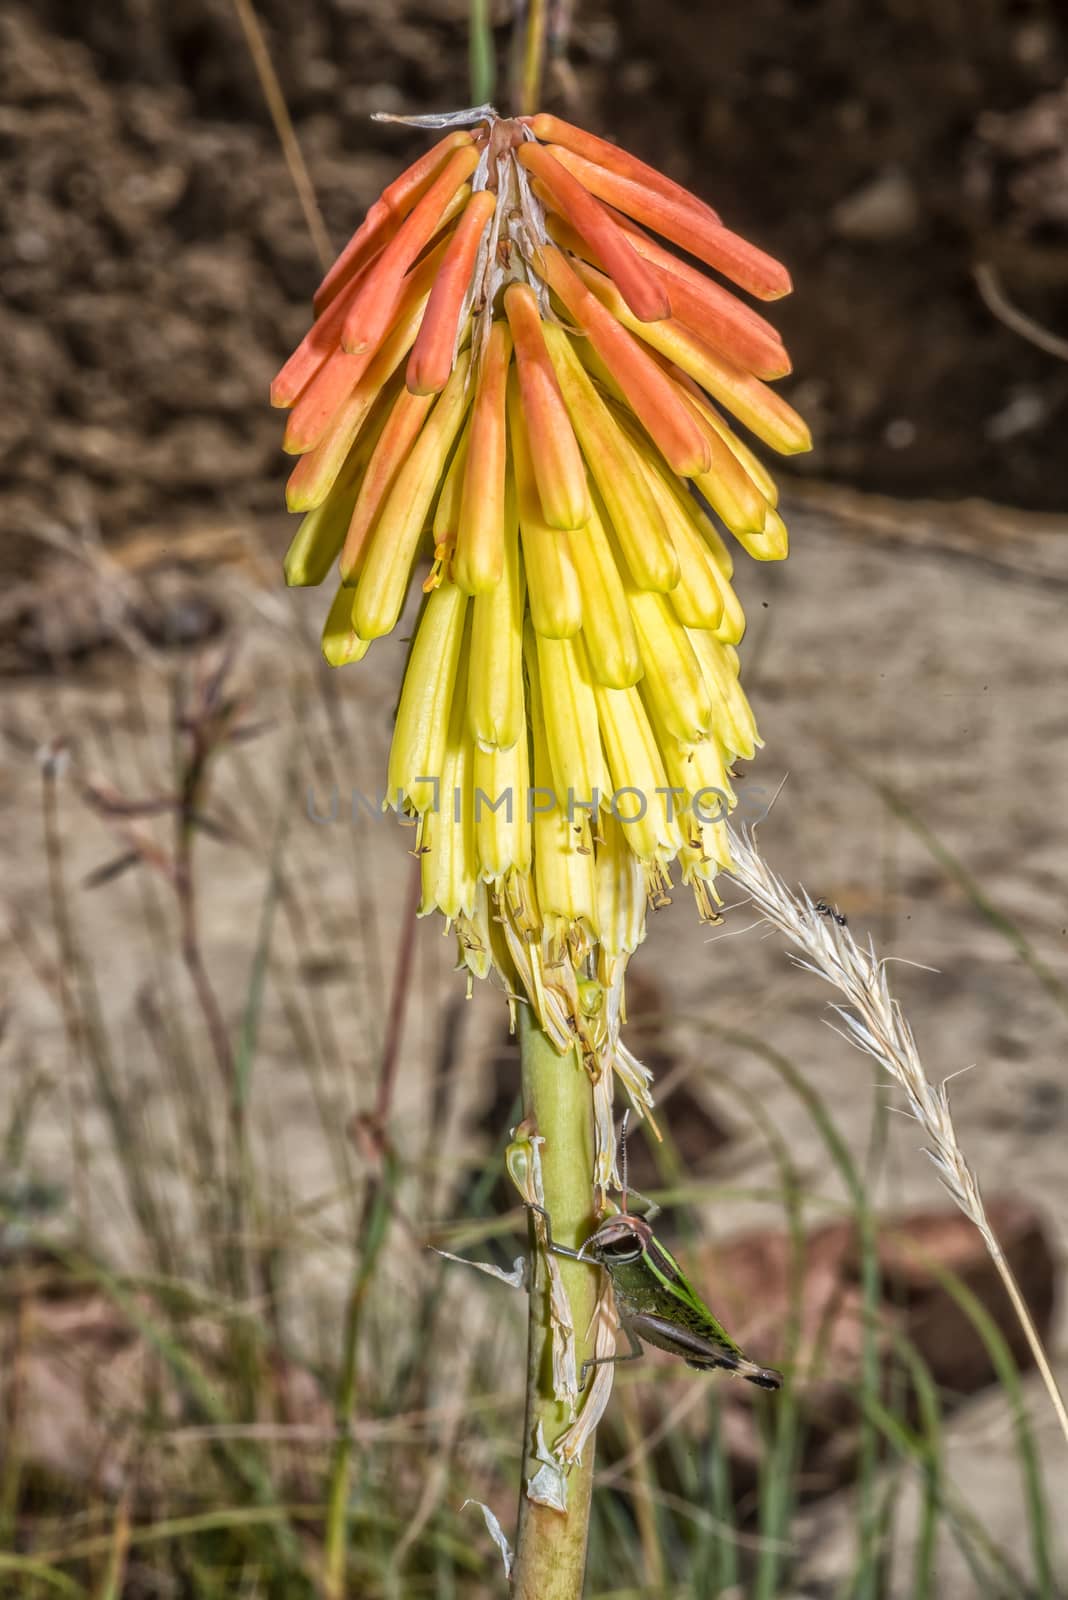 Red-hot Poker, Kniphofia porphyrantha. A grasshopper is visible by dpreezg